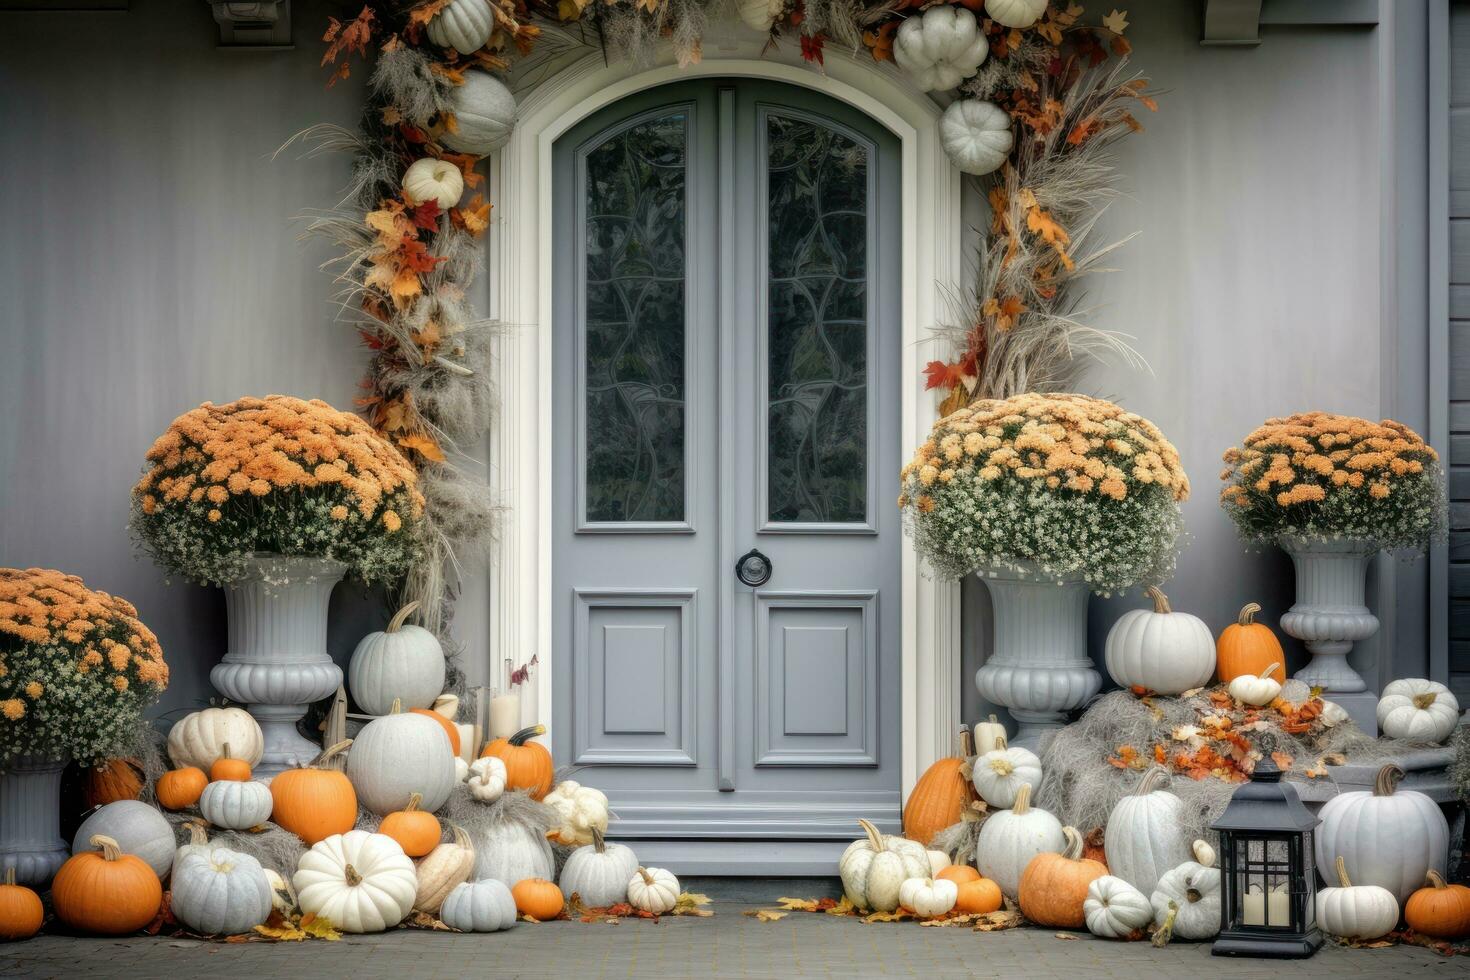 Front door with fall decor, pumpkins and autumnthemed decorations photo